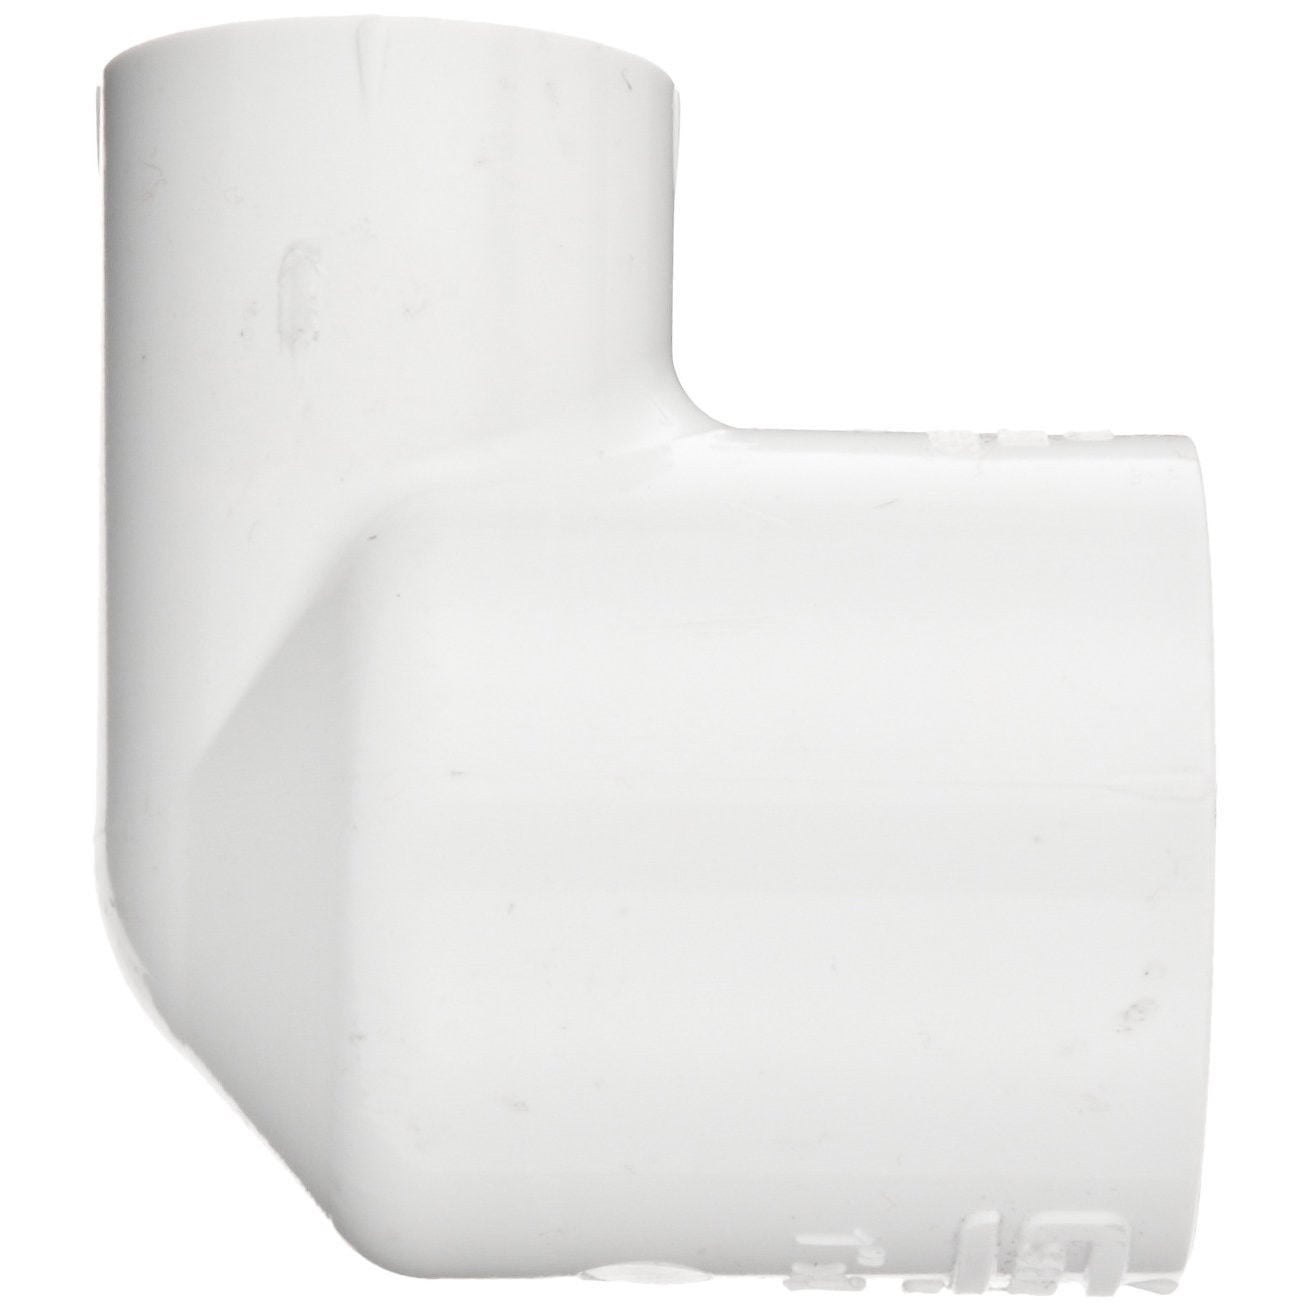 Schedule 40 Spears 406 Series PVC Pipe Fitting 90 Degree Elbow White 1-1/2 x 1 Socket 